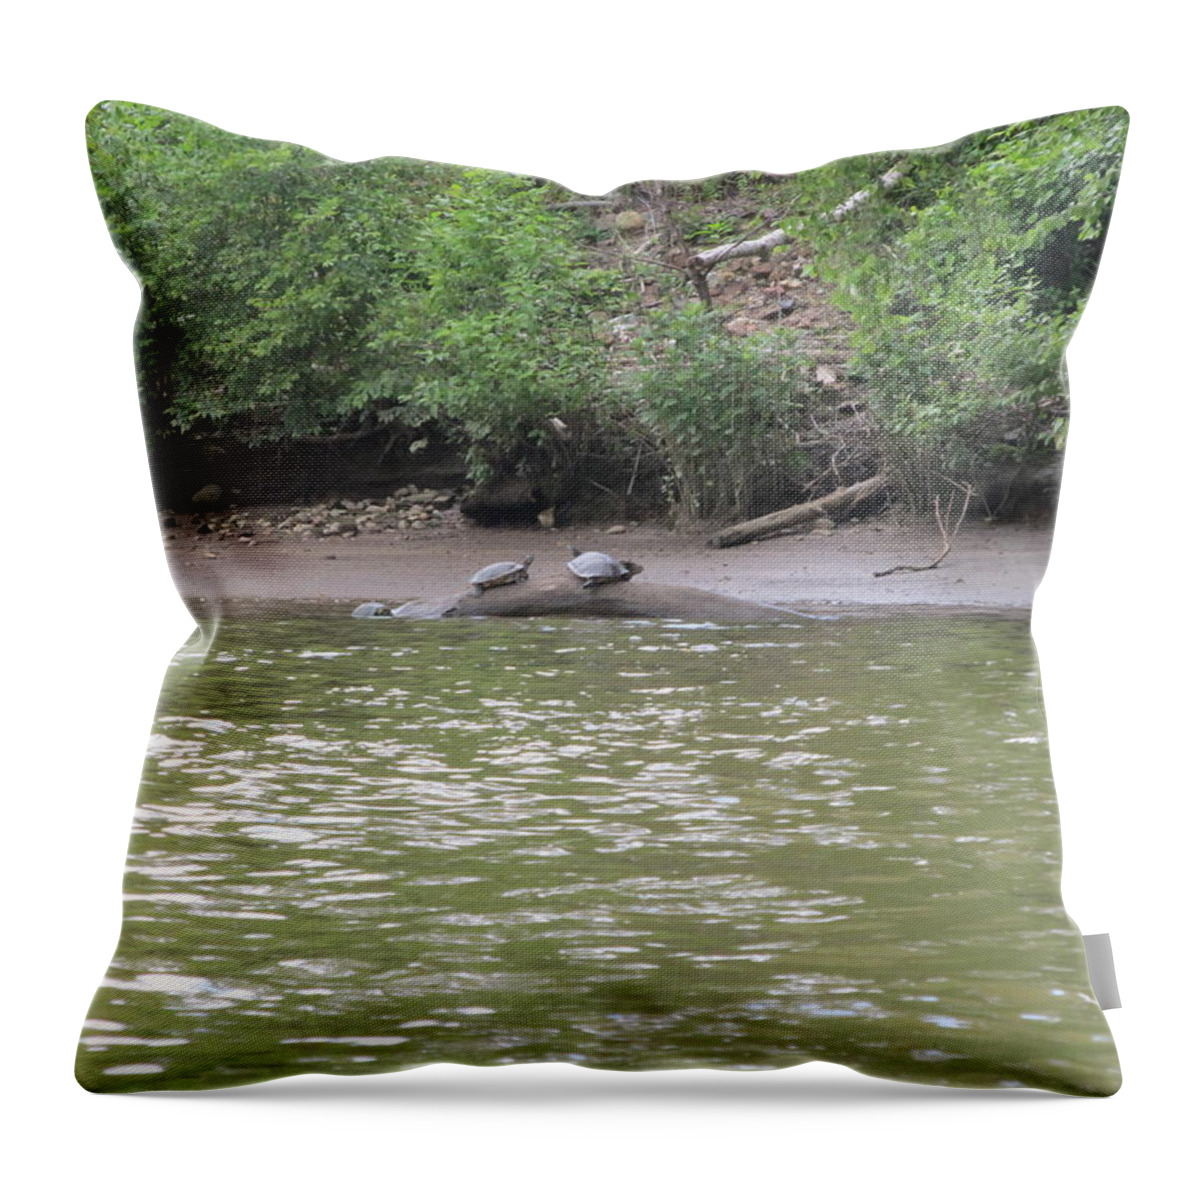  Throw Pillow featuring the photograph Virginia Scenes #25 by Digital Art Cafe